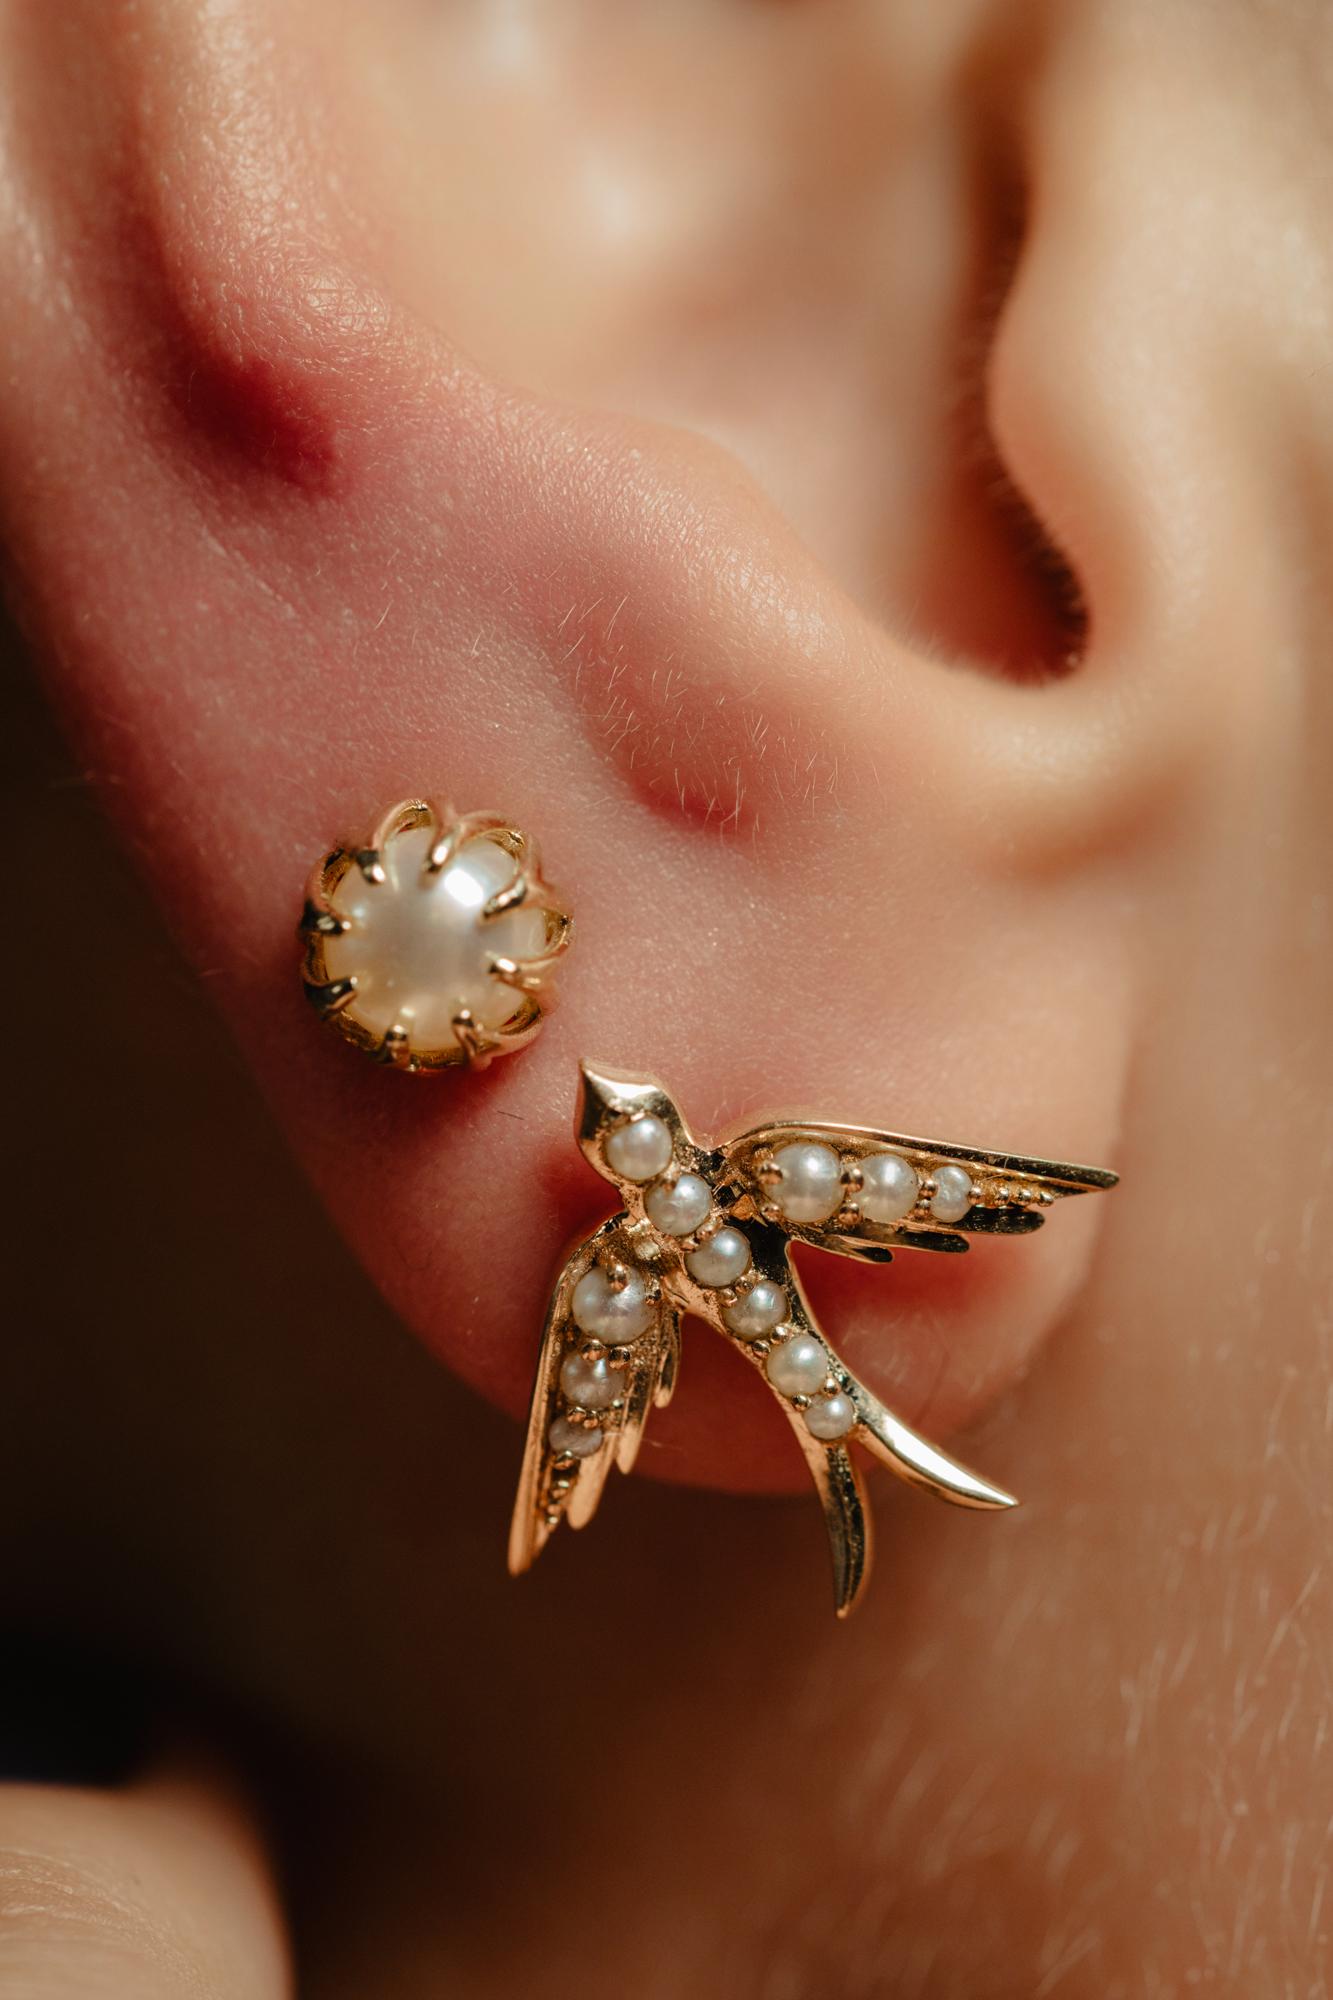 A perfect love token piece of jewelry! Romantic and very symbolic these antique revival studs are handmade by our goldsmiths. Made of solid 14k yellow gold, these beautiful Victorian style swallow earrings are set with natural pearls.

The design of